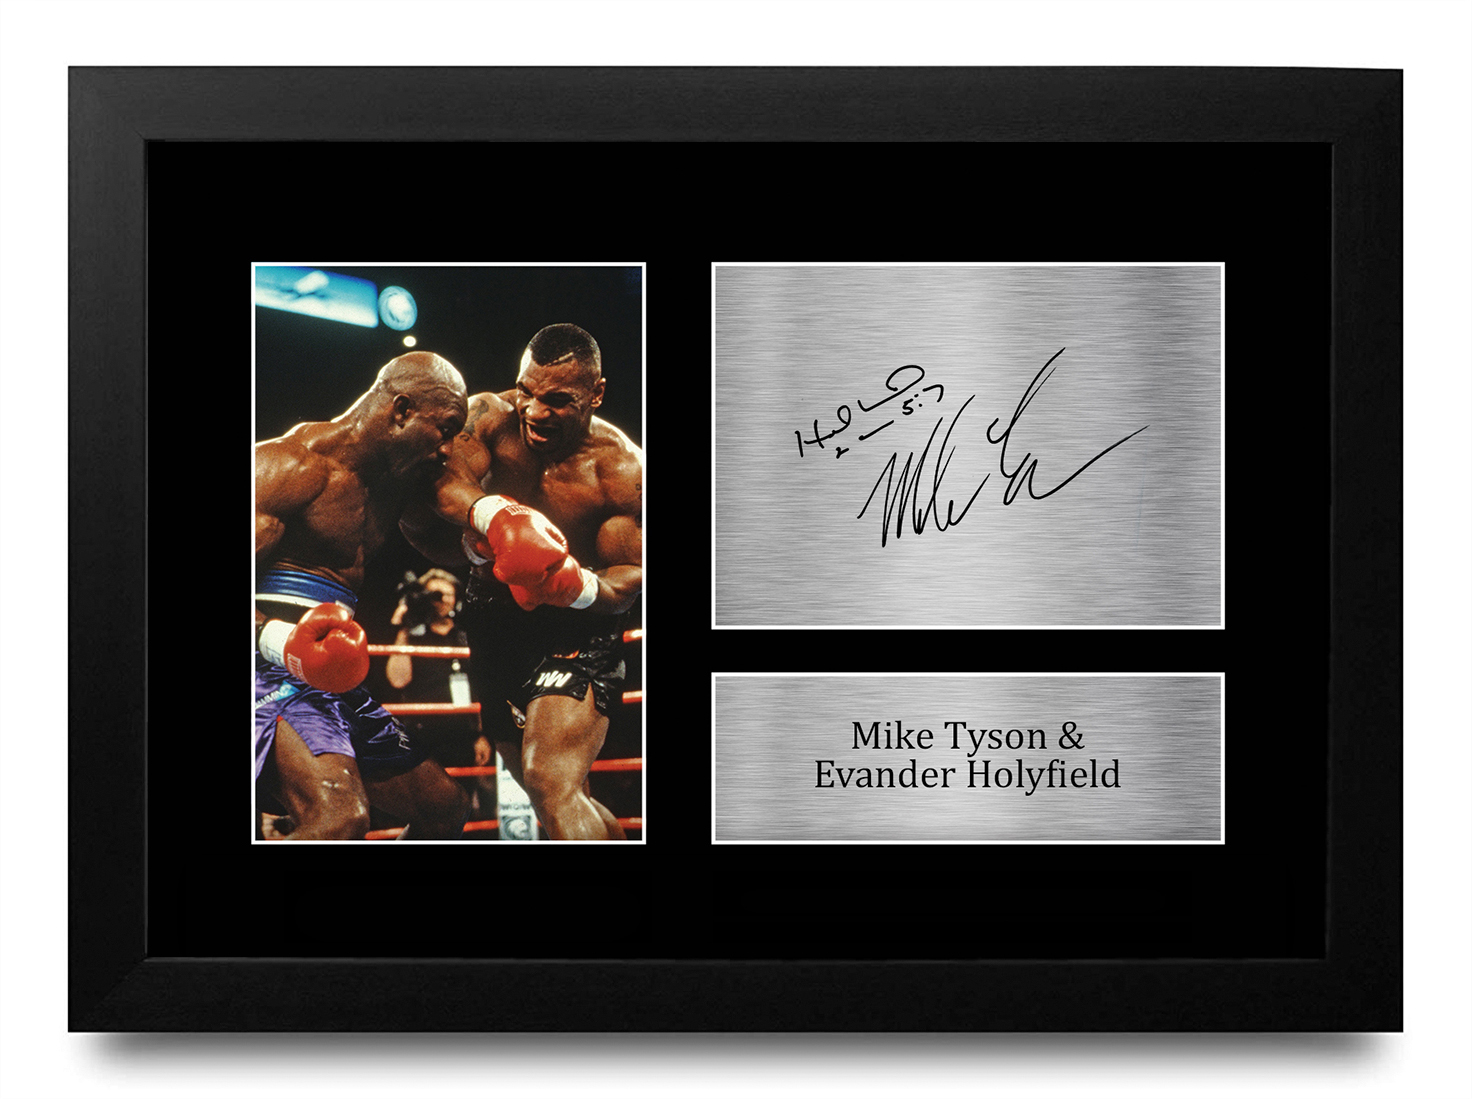 MIKE TYSON SIGNED X 3 PRINT SPECIAL OFFER BOXING A4 PHOTO AUTOGRAPH PRINTS 